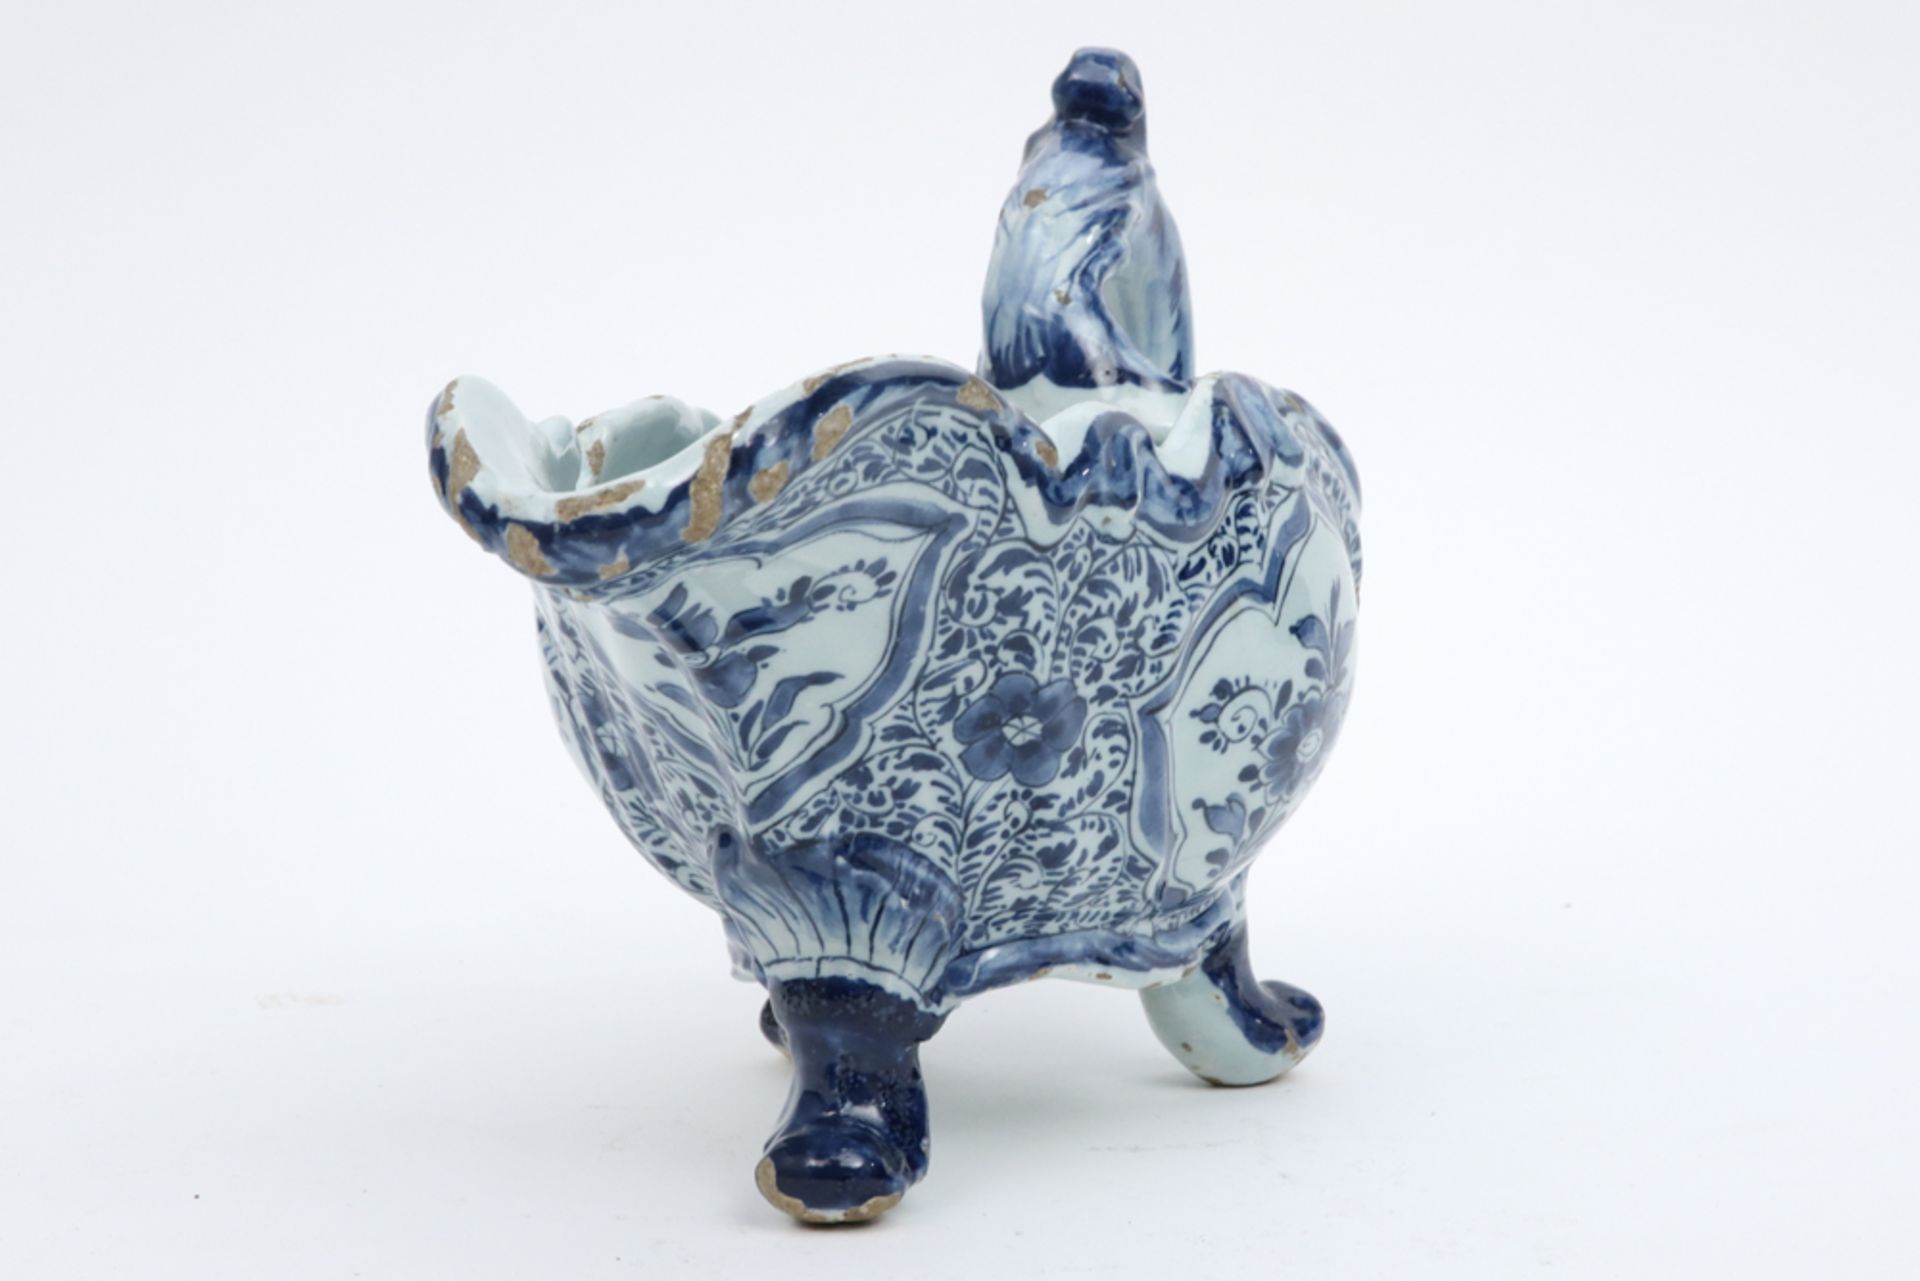 18th Cent. sauce boat in marked ceramic from Delft with a blue-white decor || Achttiende eeuwse - Image 3 of 4